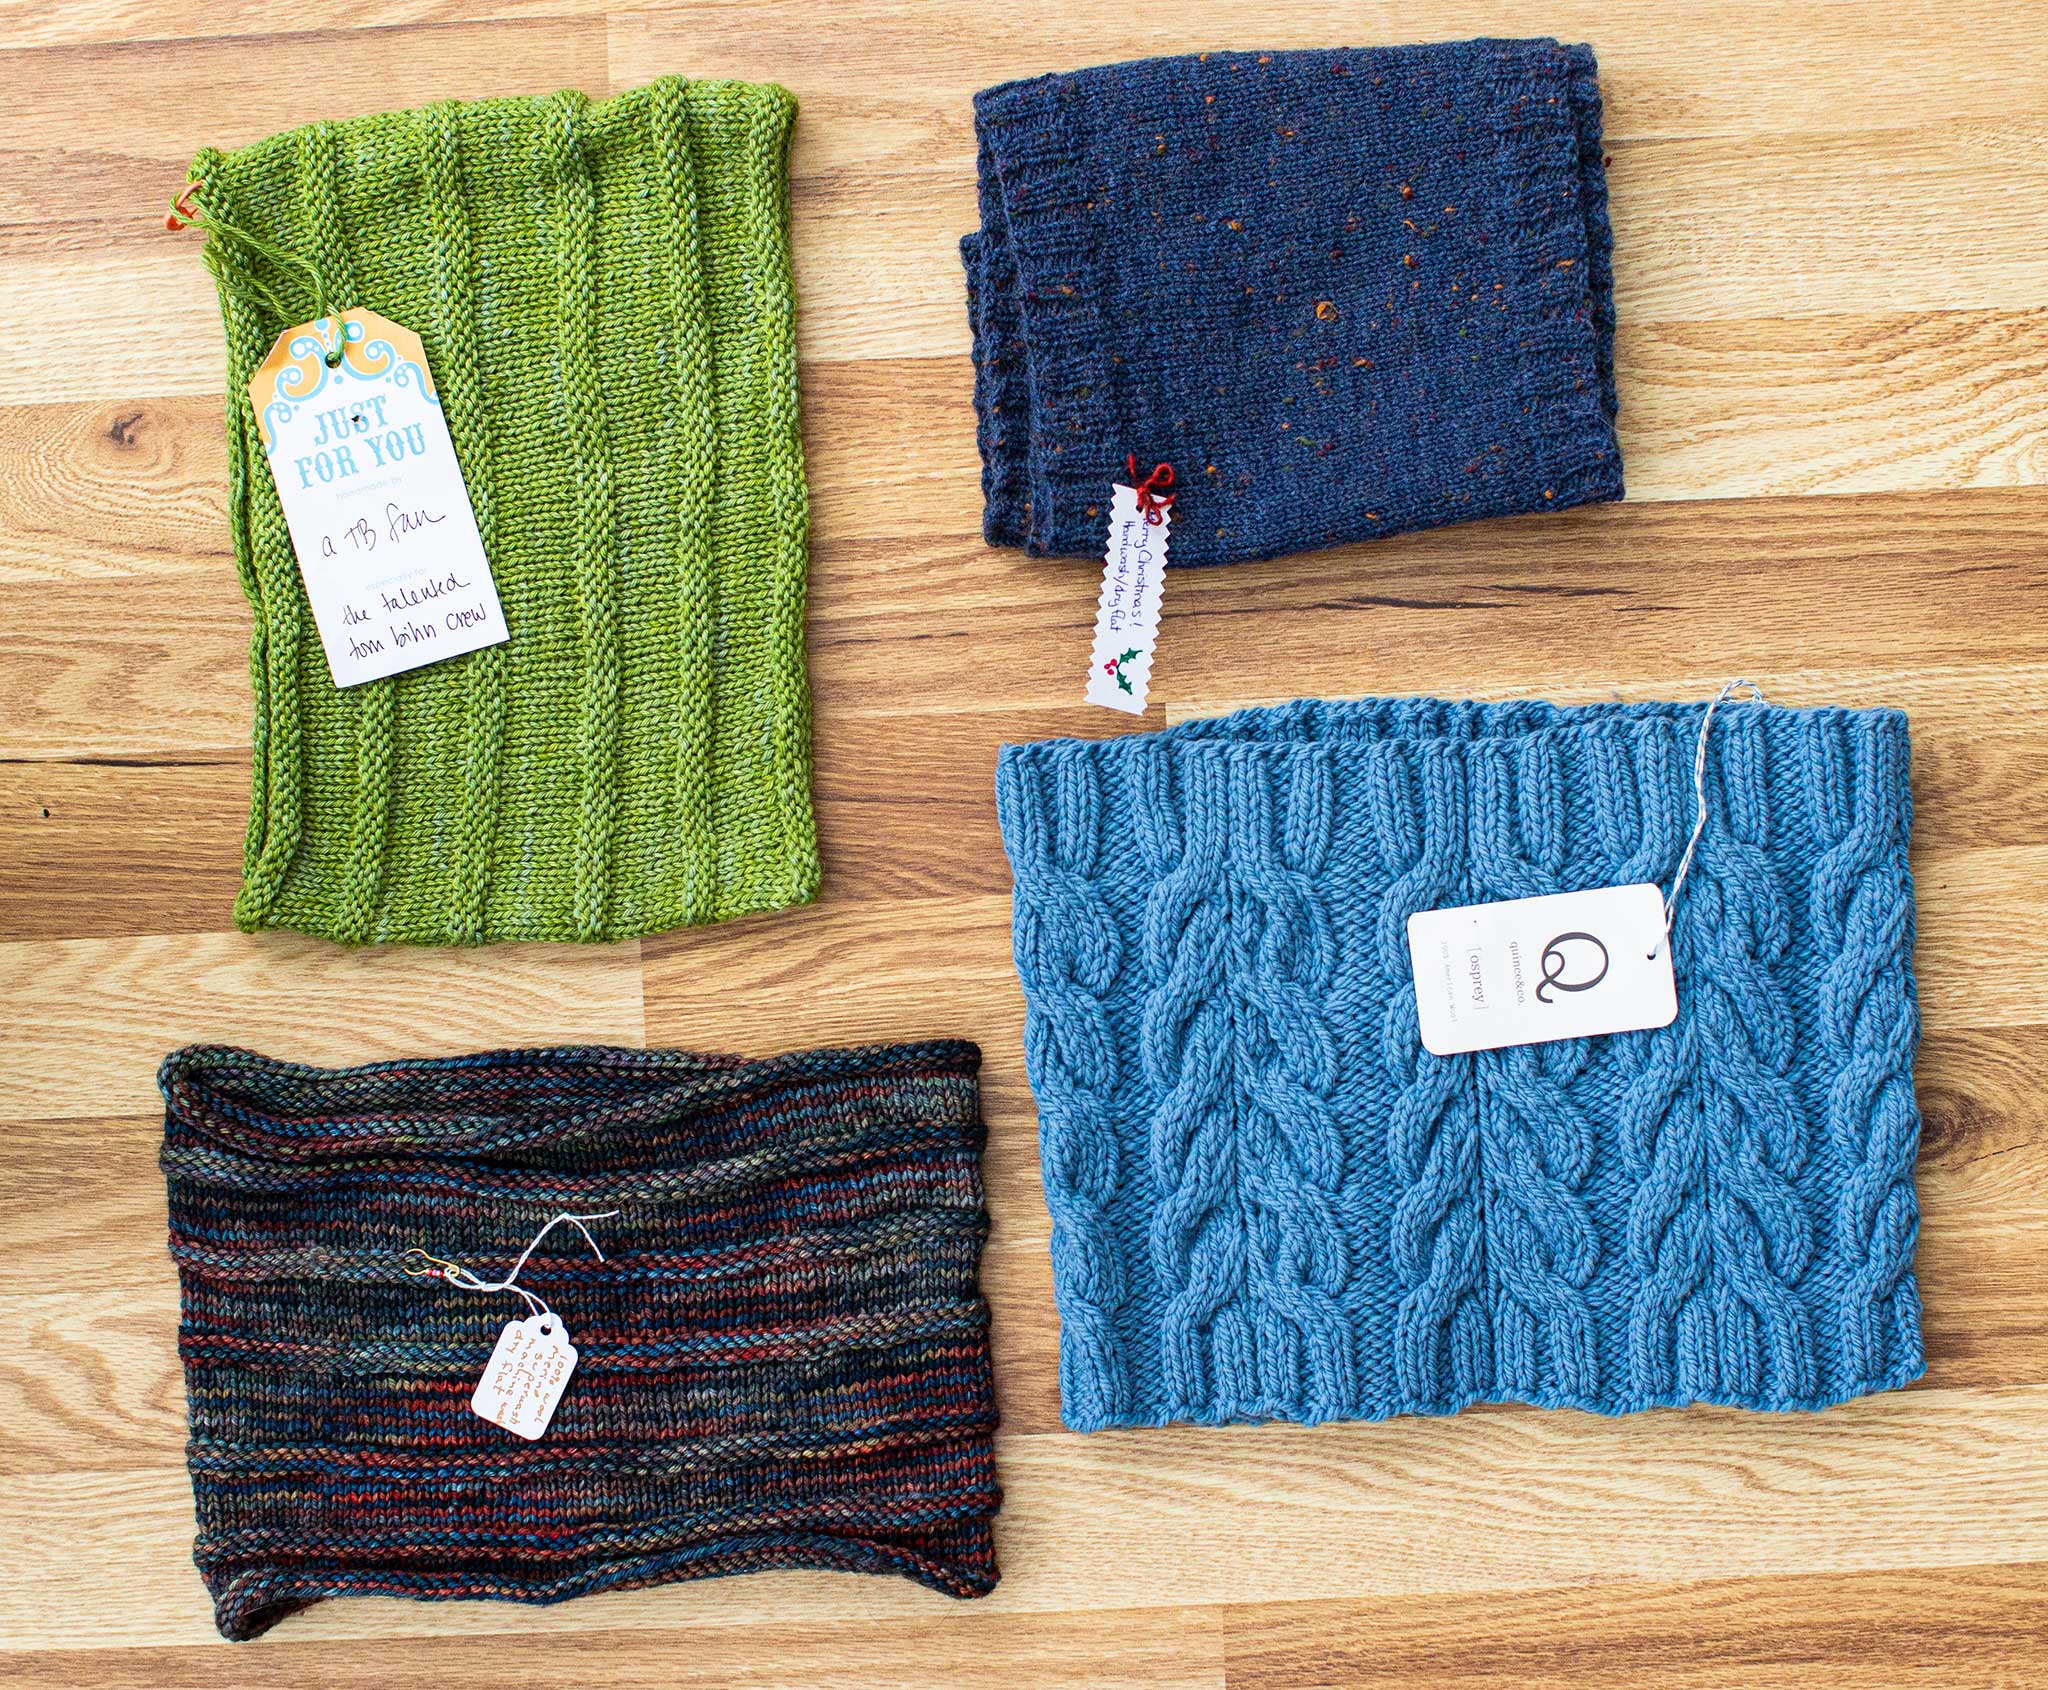 Four cowls! Each an interesting shade of dark blue, medium blue, multi-color and green.